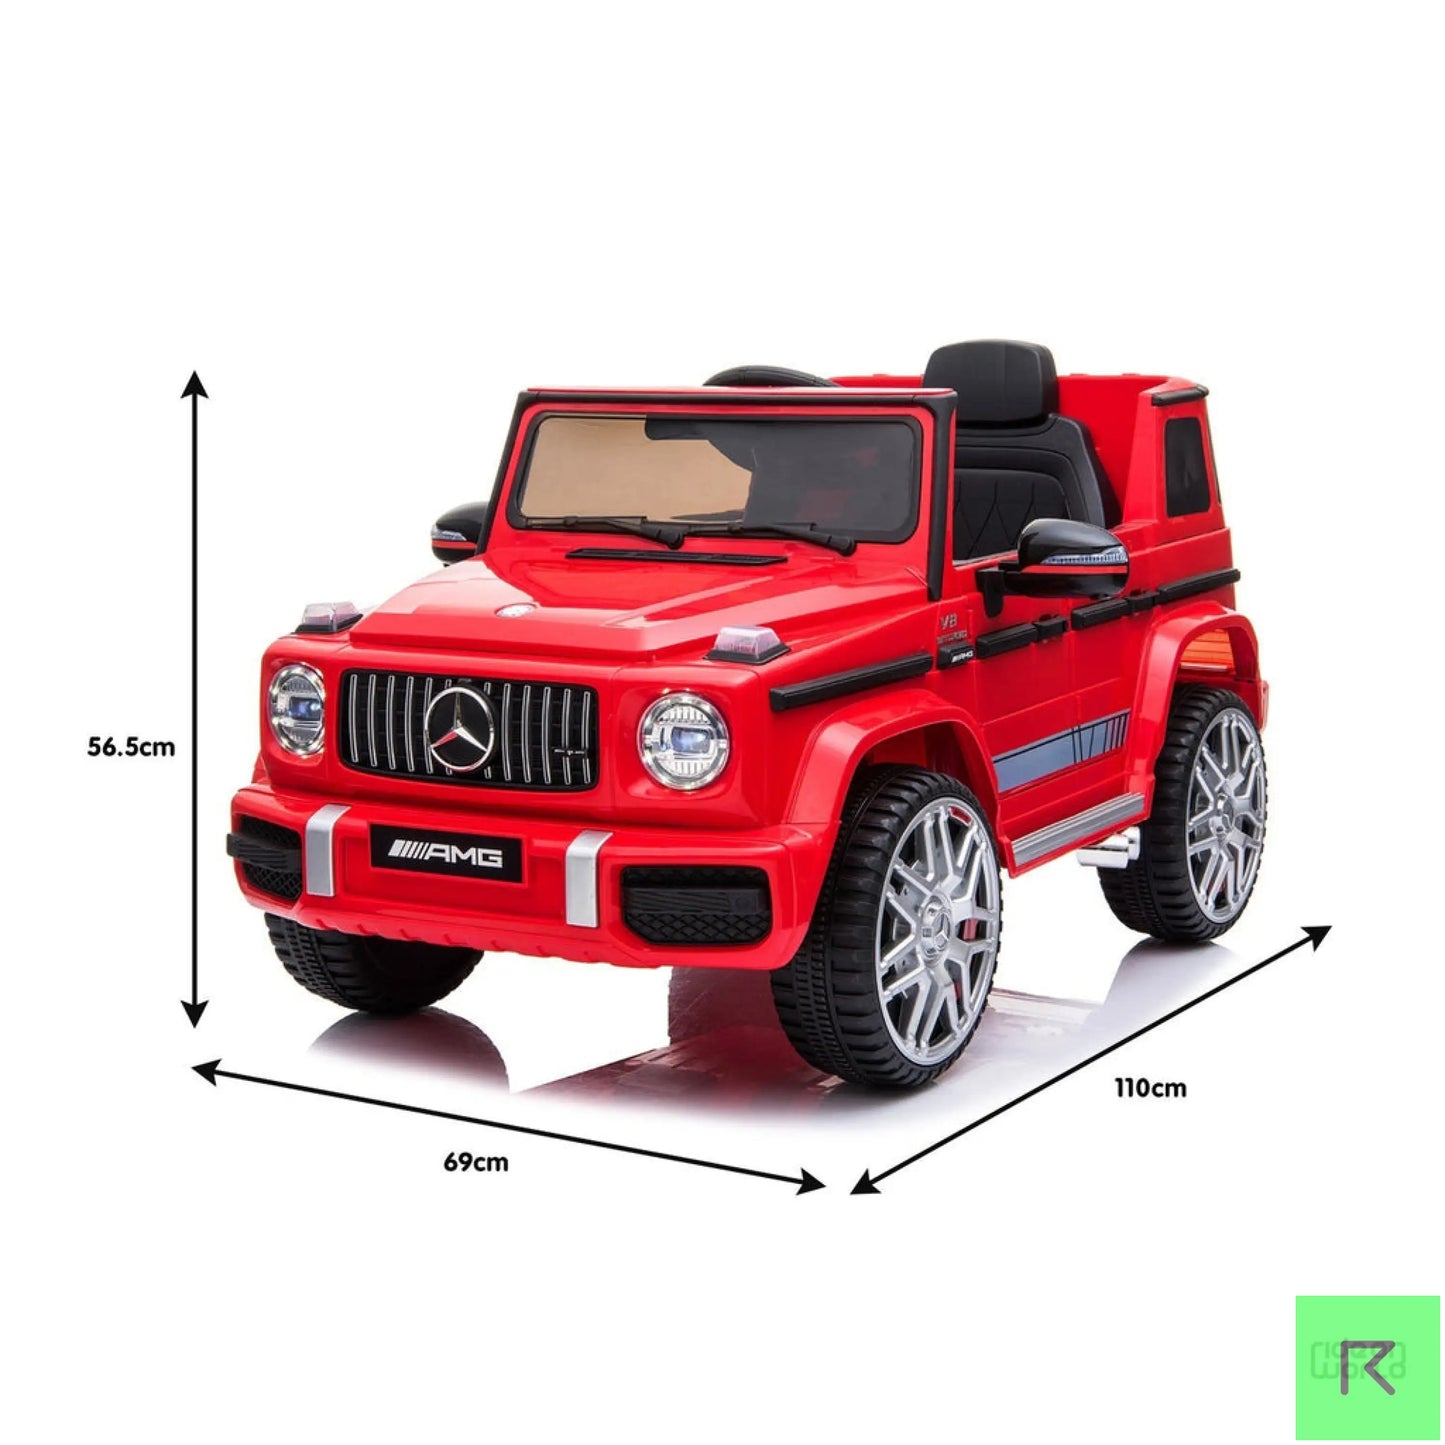 MERCEDES BENZ RED AMG G63 Licensed Kids Ride On Electric Car Remote Control - Red